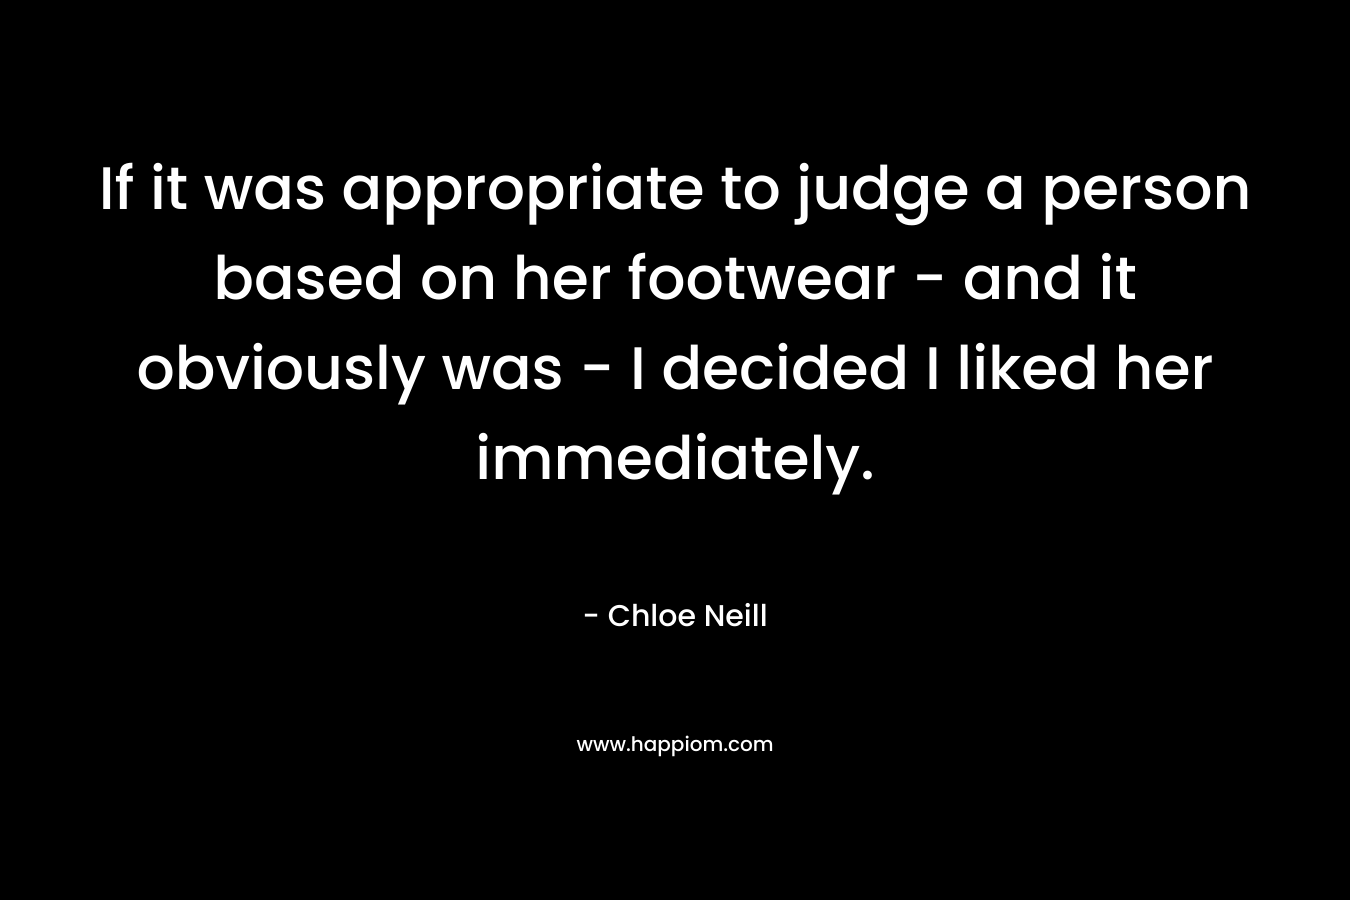 If it was appropriate to judge a person based on her footwear – and it obviously was – I decided I liked her immediately. – Chloe Neill